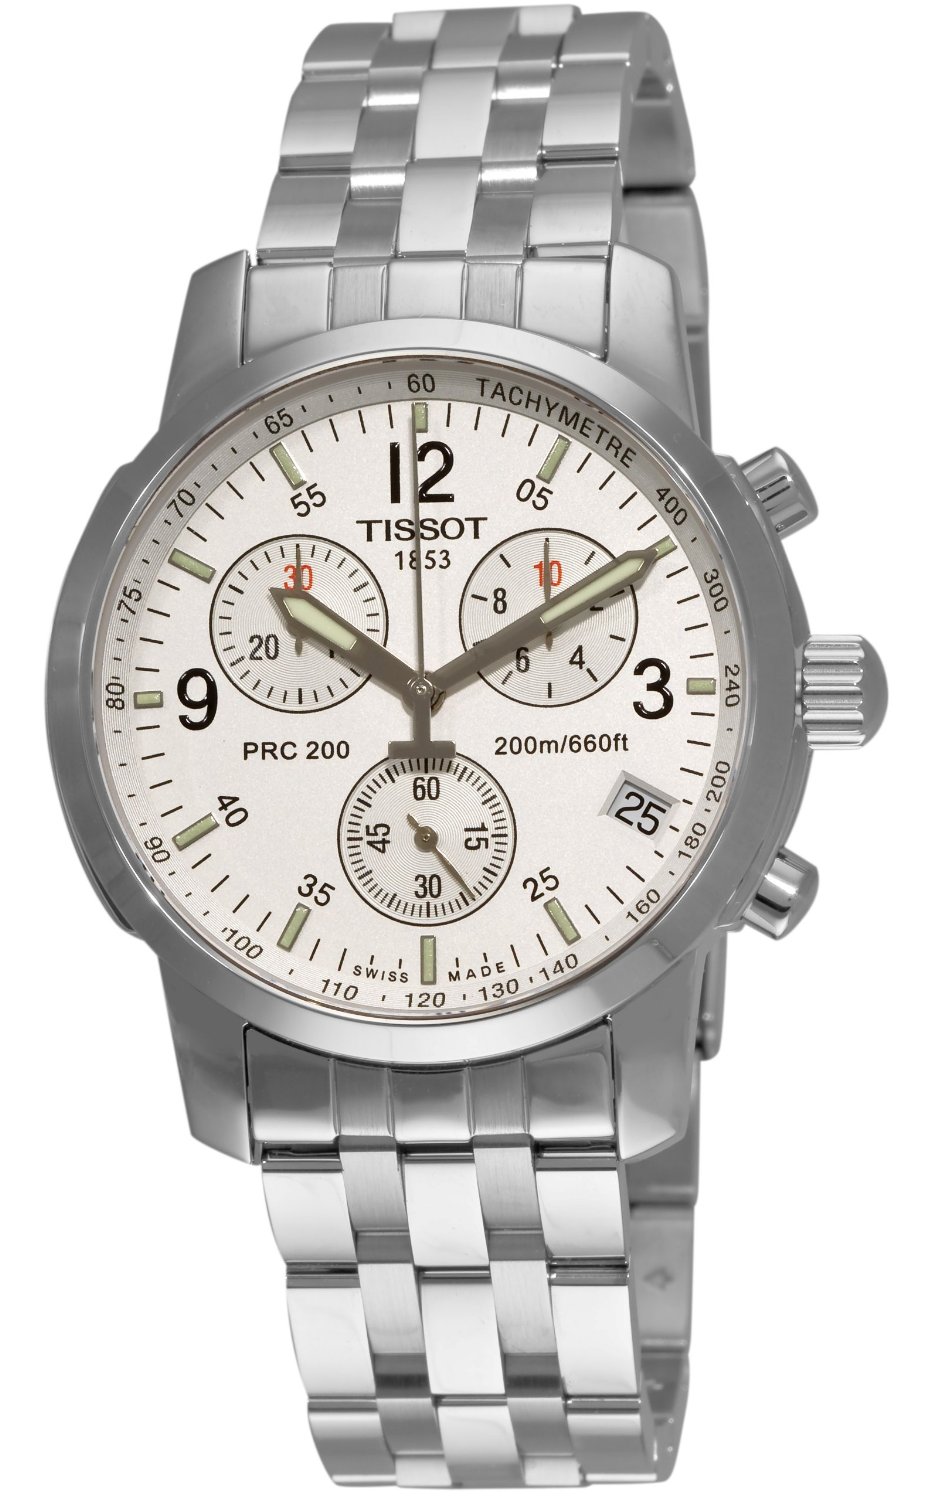 Tissot Men's T17158632 T-Sport PRC200 Chronograph Stainless Steel Silver Dial Watch  $279.00 